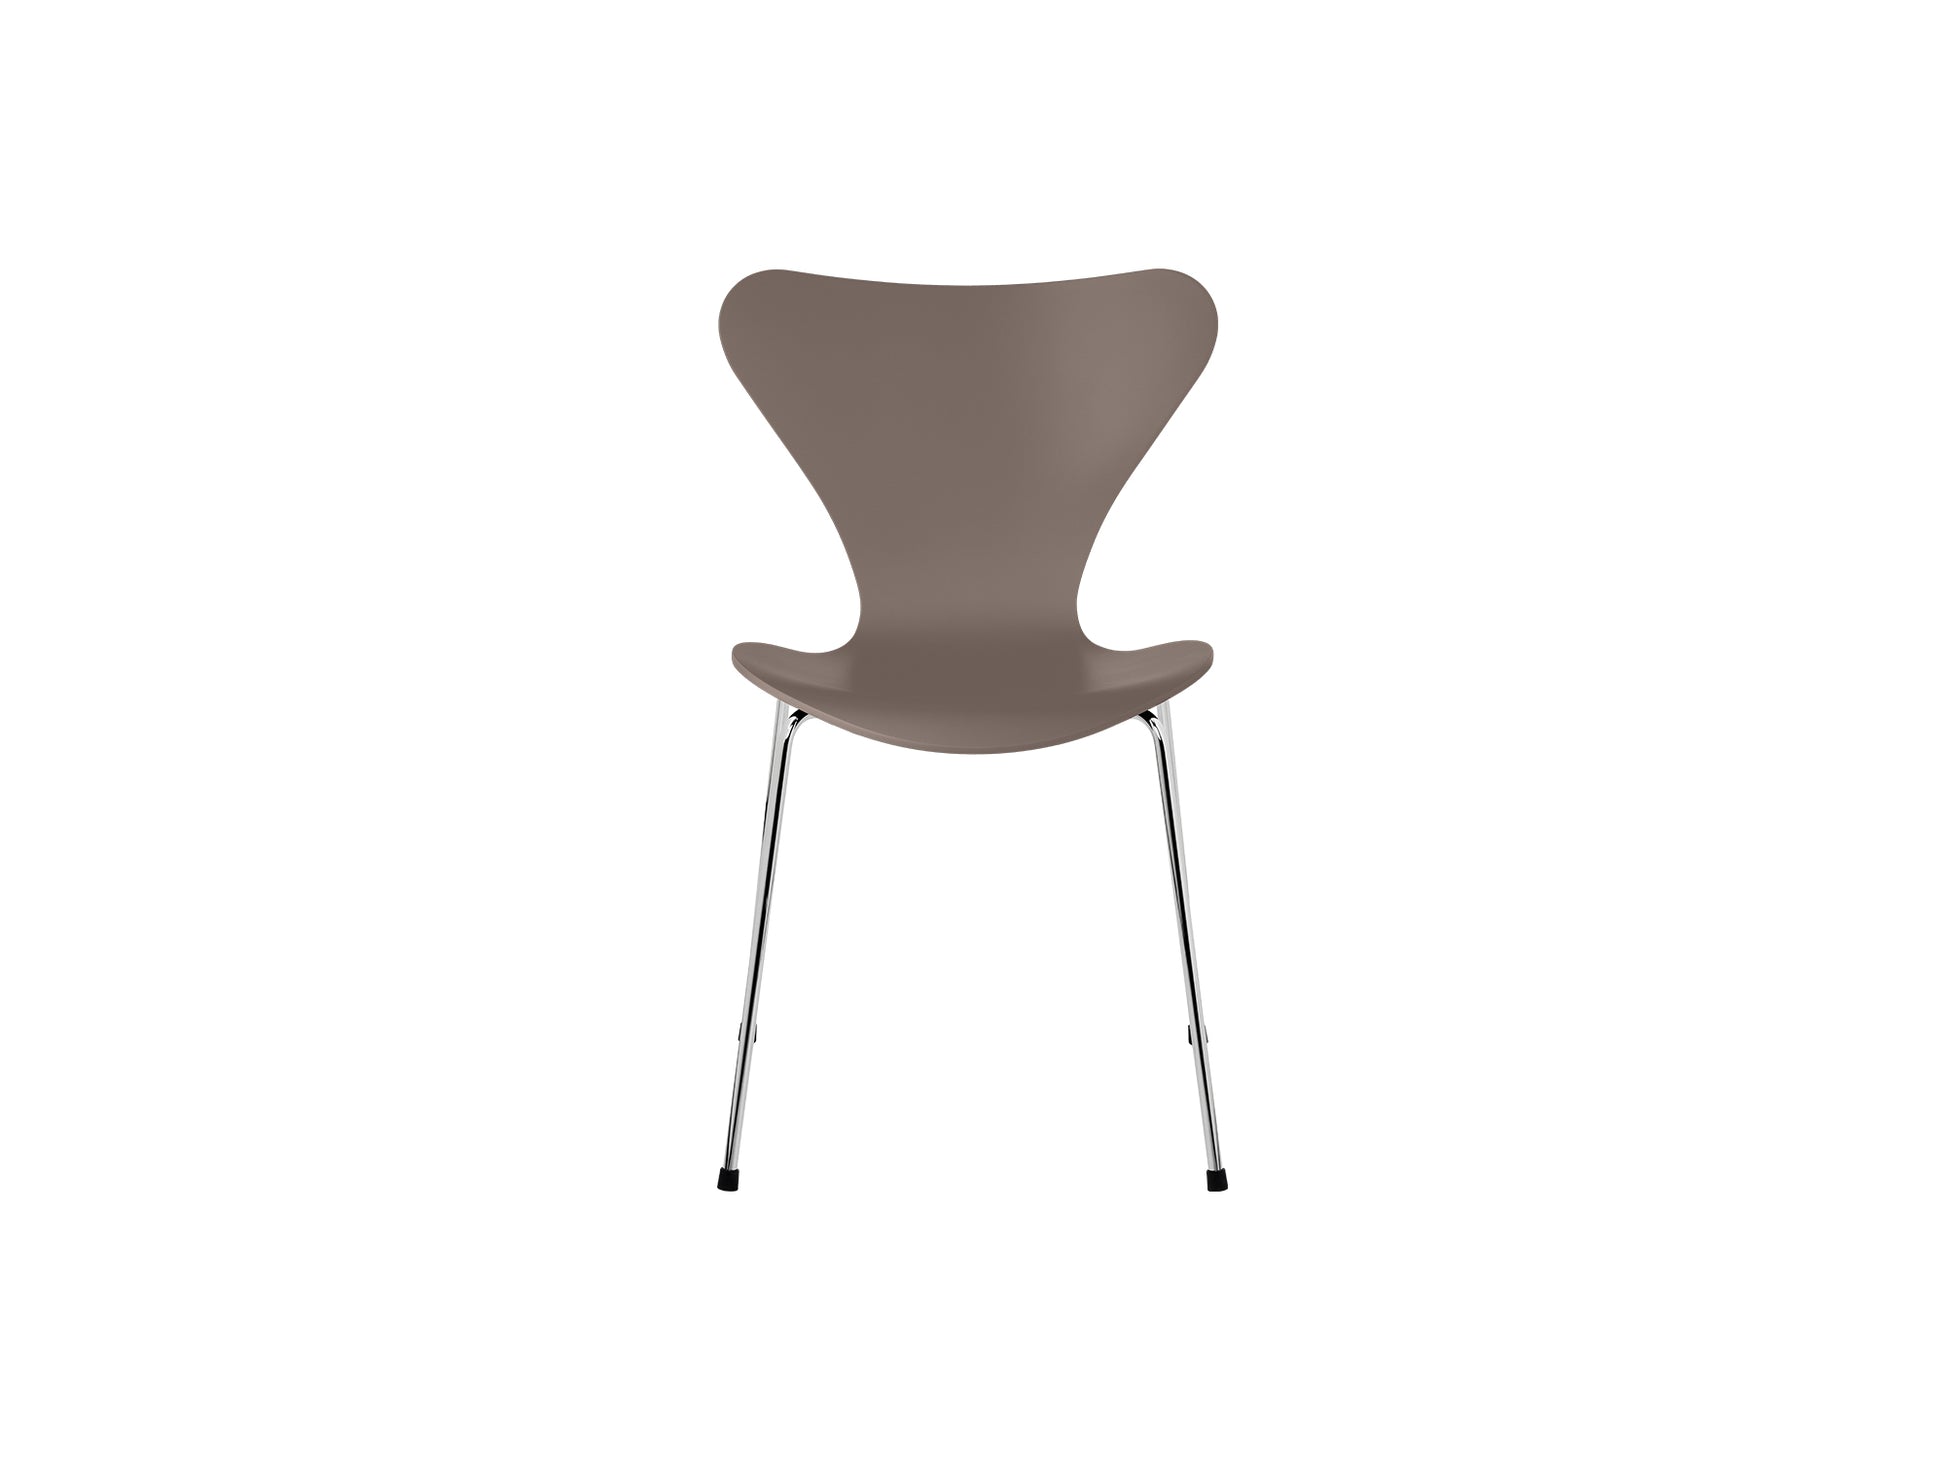 Series 7™ 3107 Dining Chair by Fritz Hansen - Deep Clay Lacquered Veneer Shell / Chromed Steel